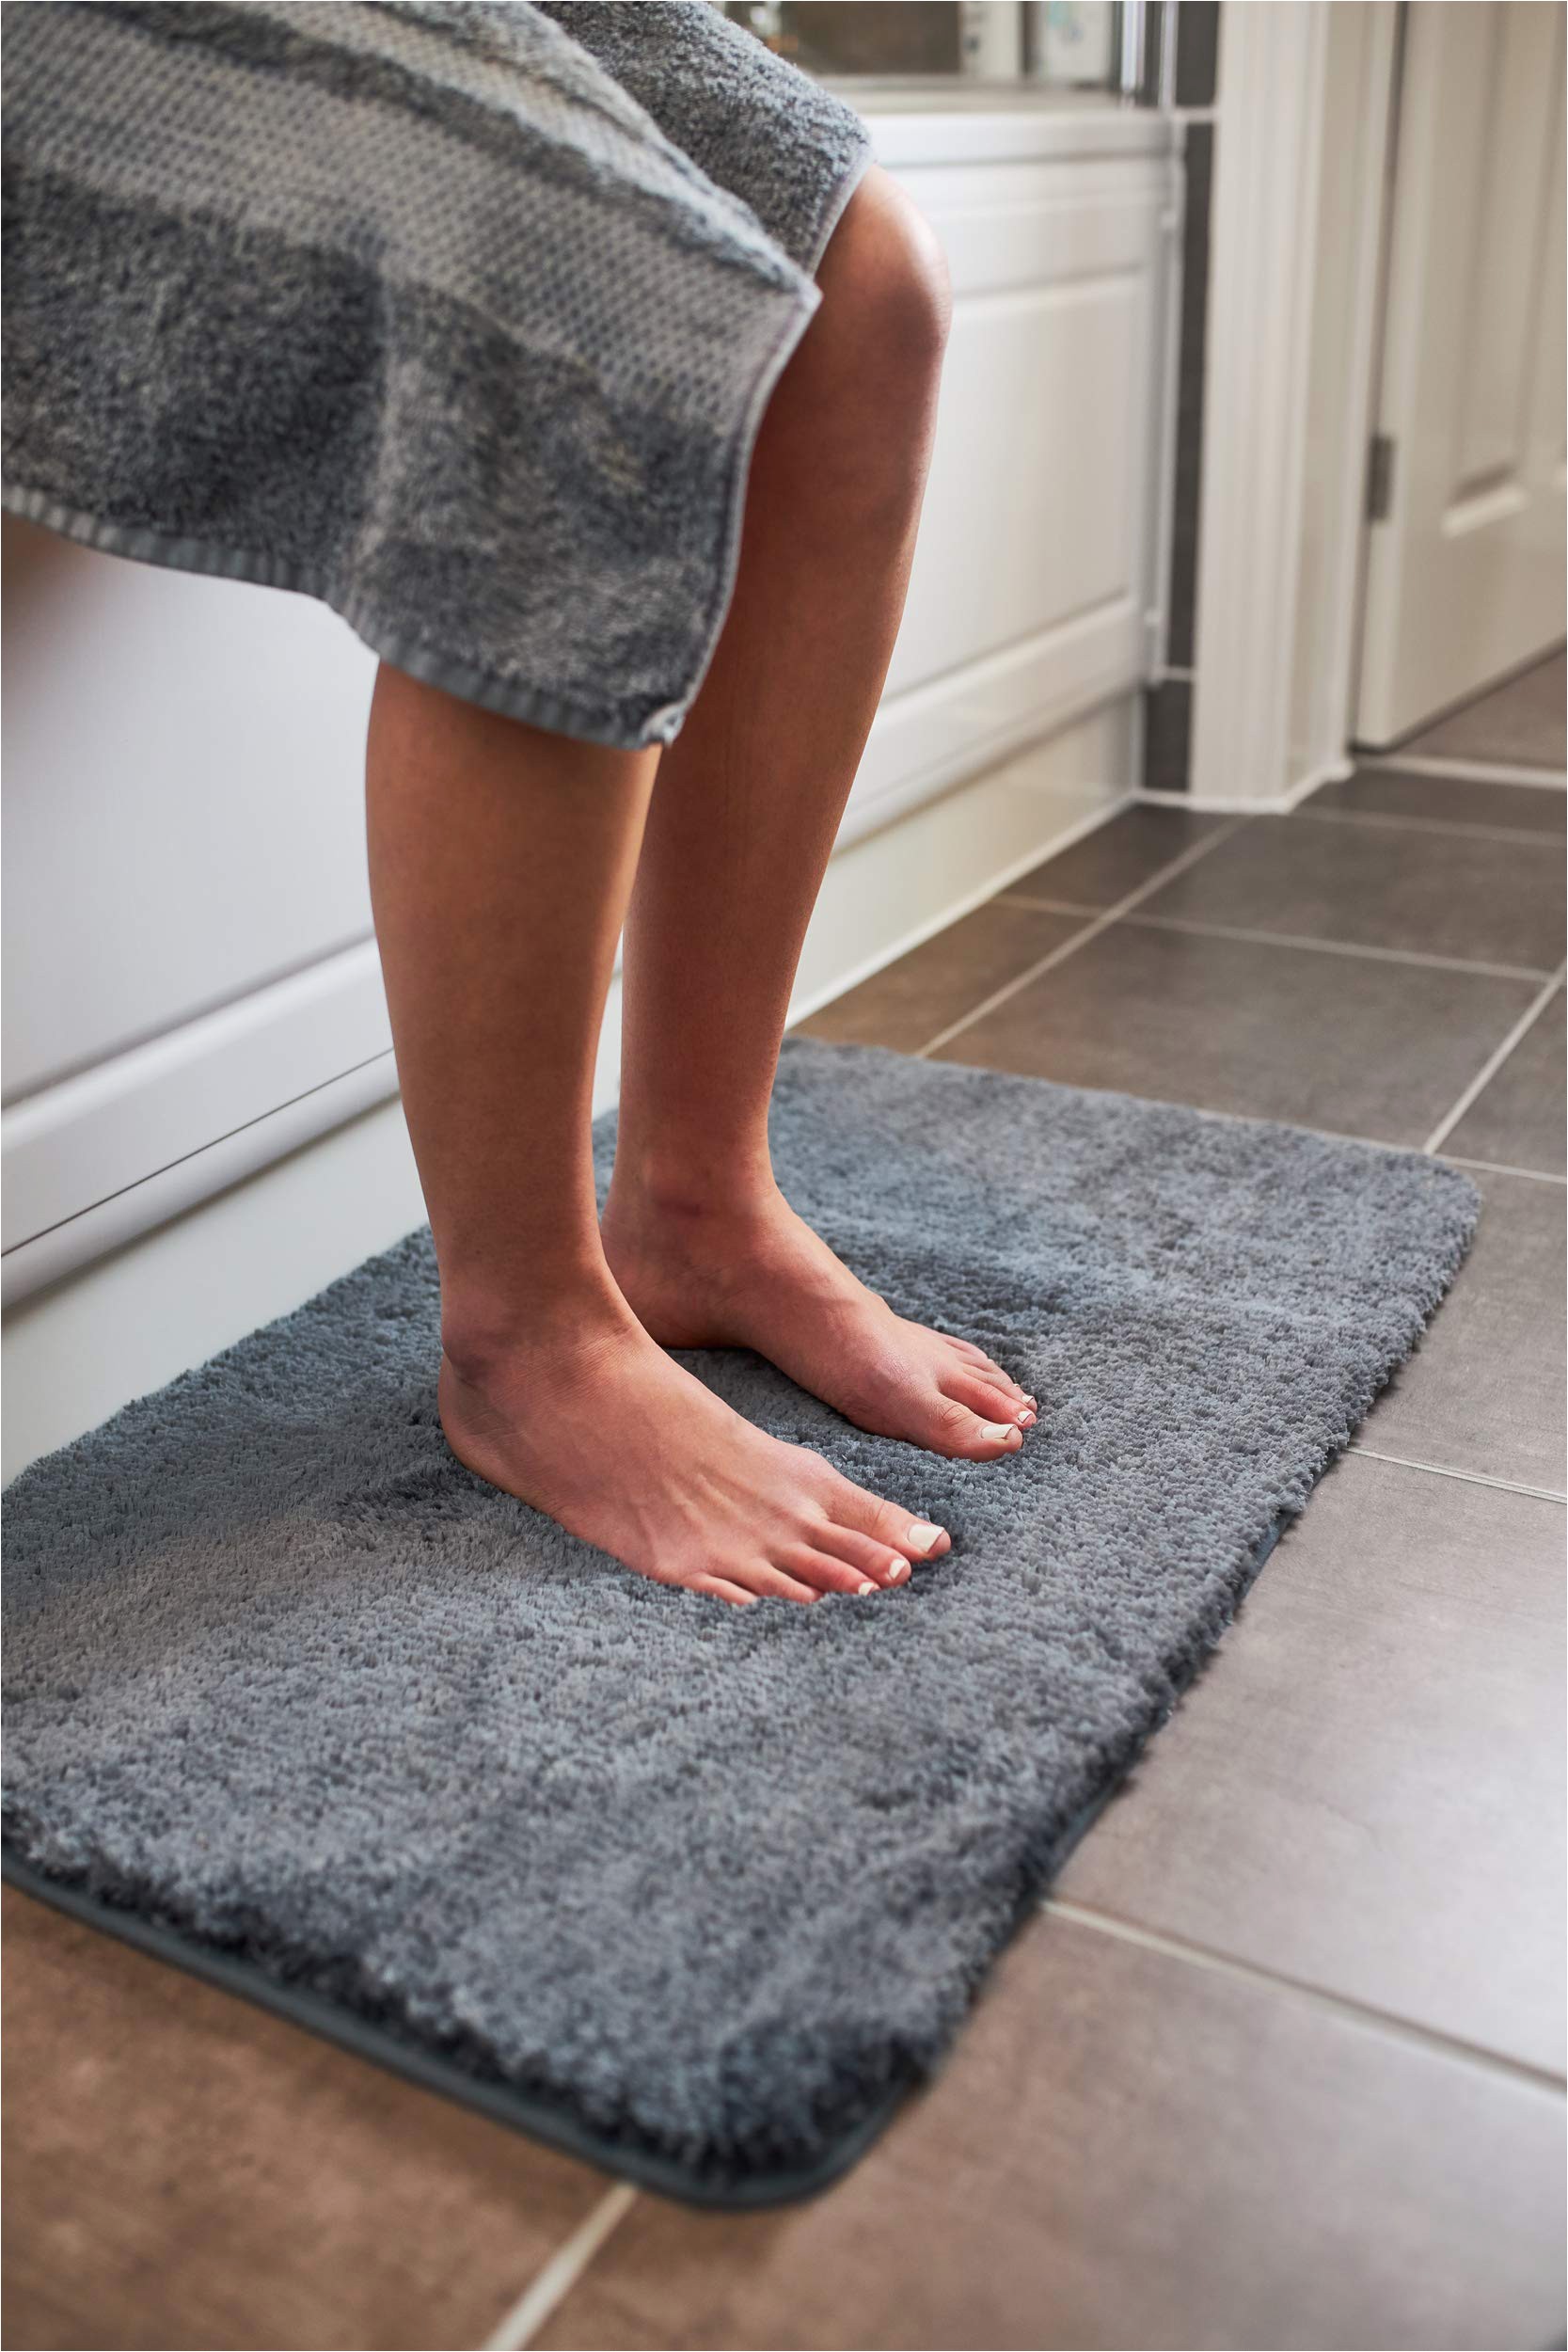 30 by 50 Bathroom Rugs Luxury Grey Bath Mat Microfiber Non Slip Bath Rug with Super soft Absorbent Dry Fast Design for Bath and Shower